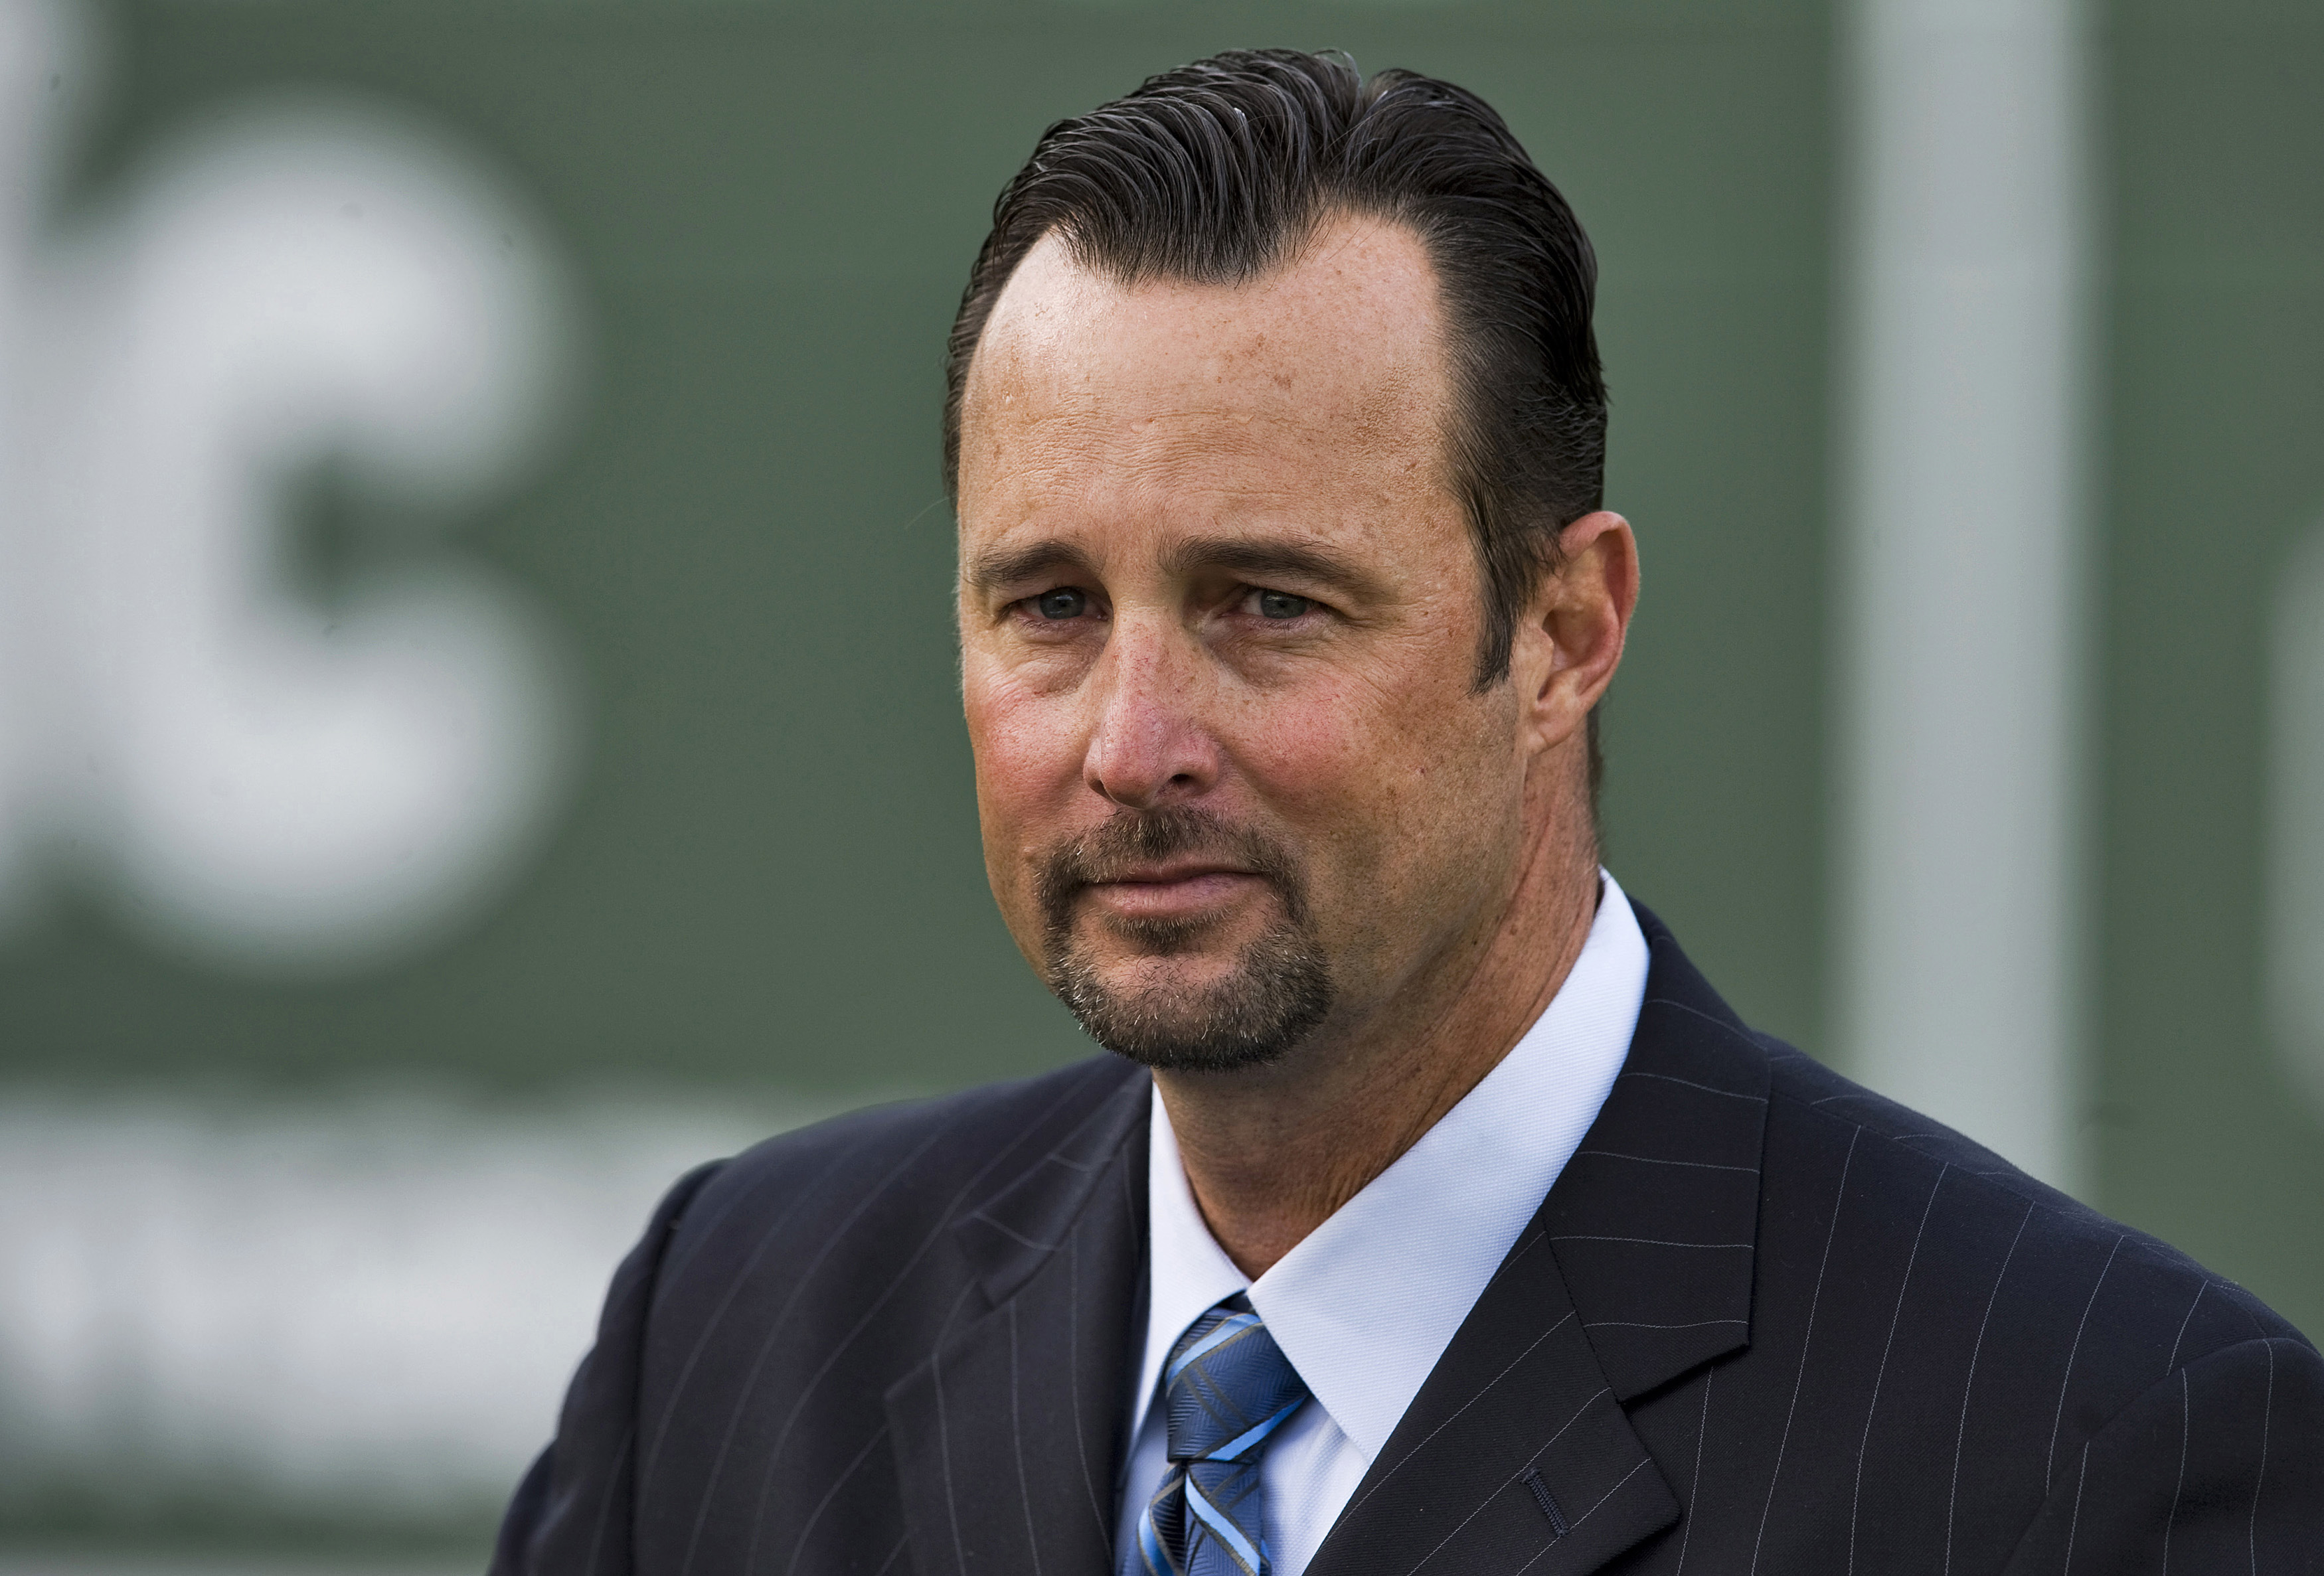 Tim Wakefield, former Red Sox knuckleballer, dead at 57 from brain